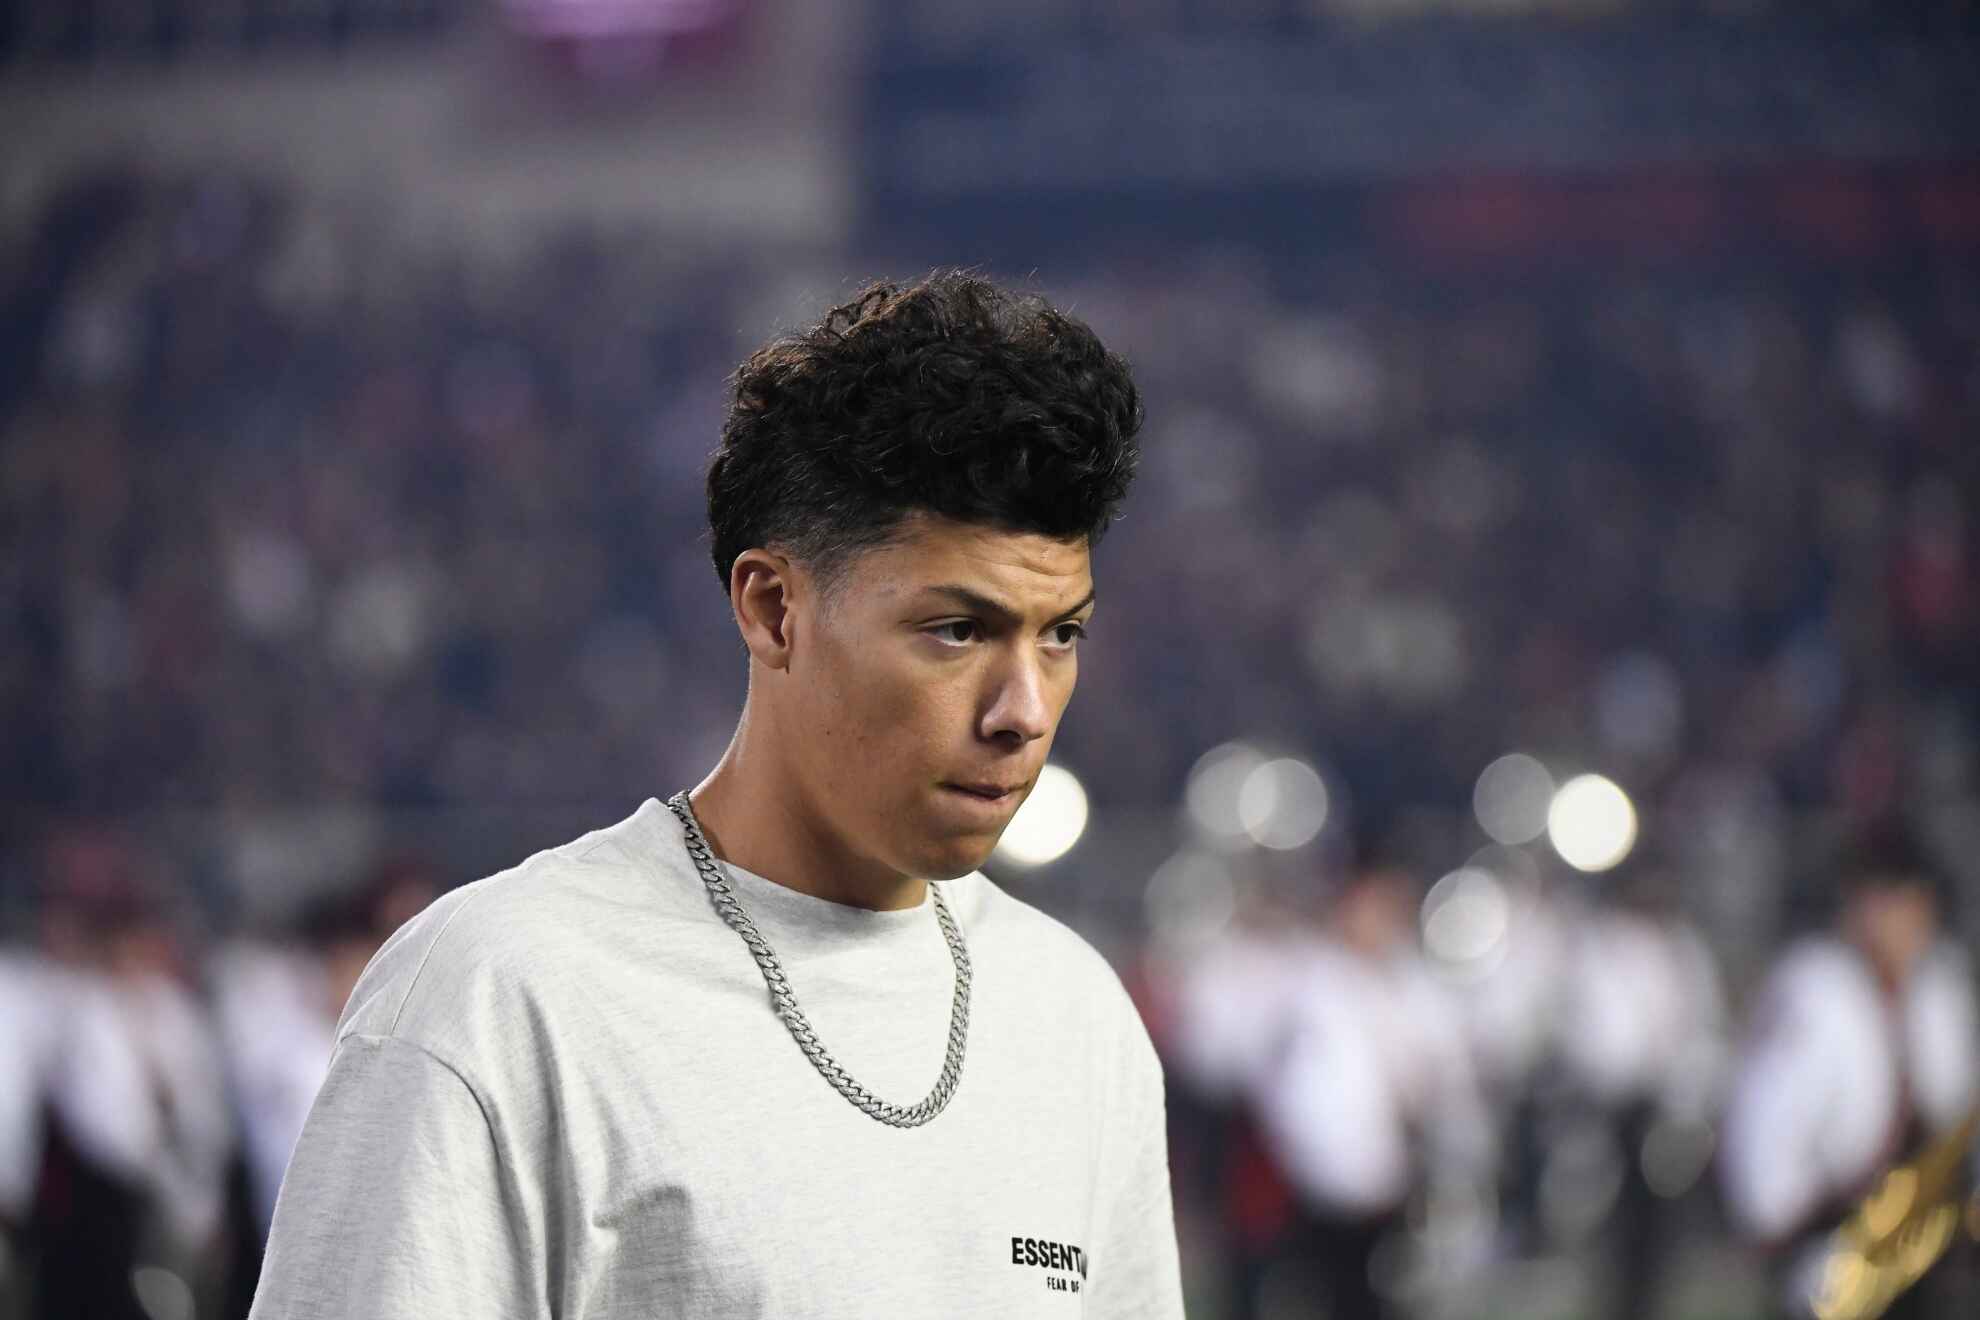 jackson-mahomes-alleged-victim-not-cooperating-resulting-in-move-to-drop-3-charges